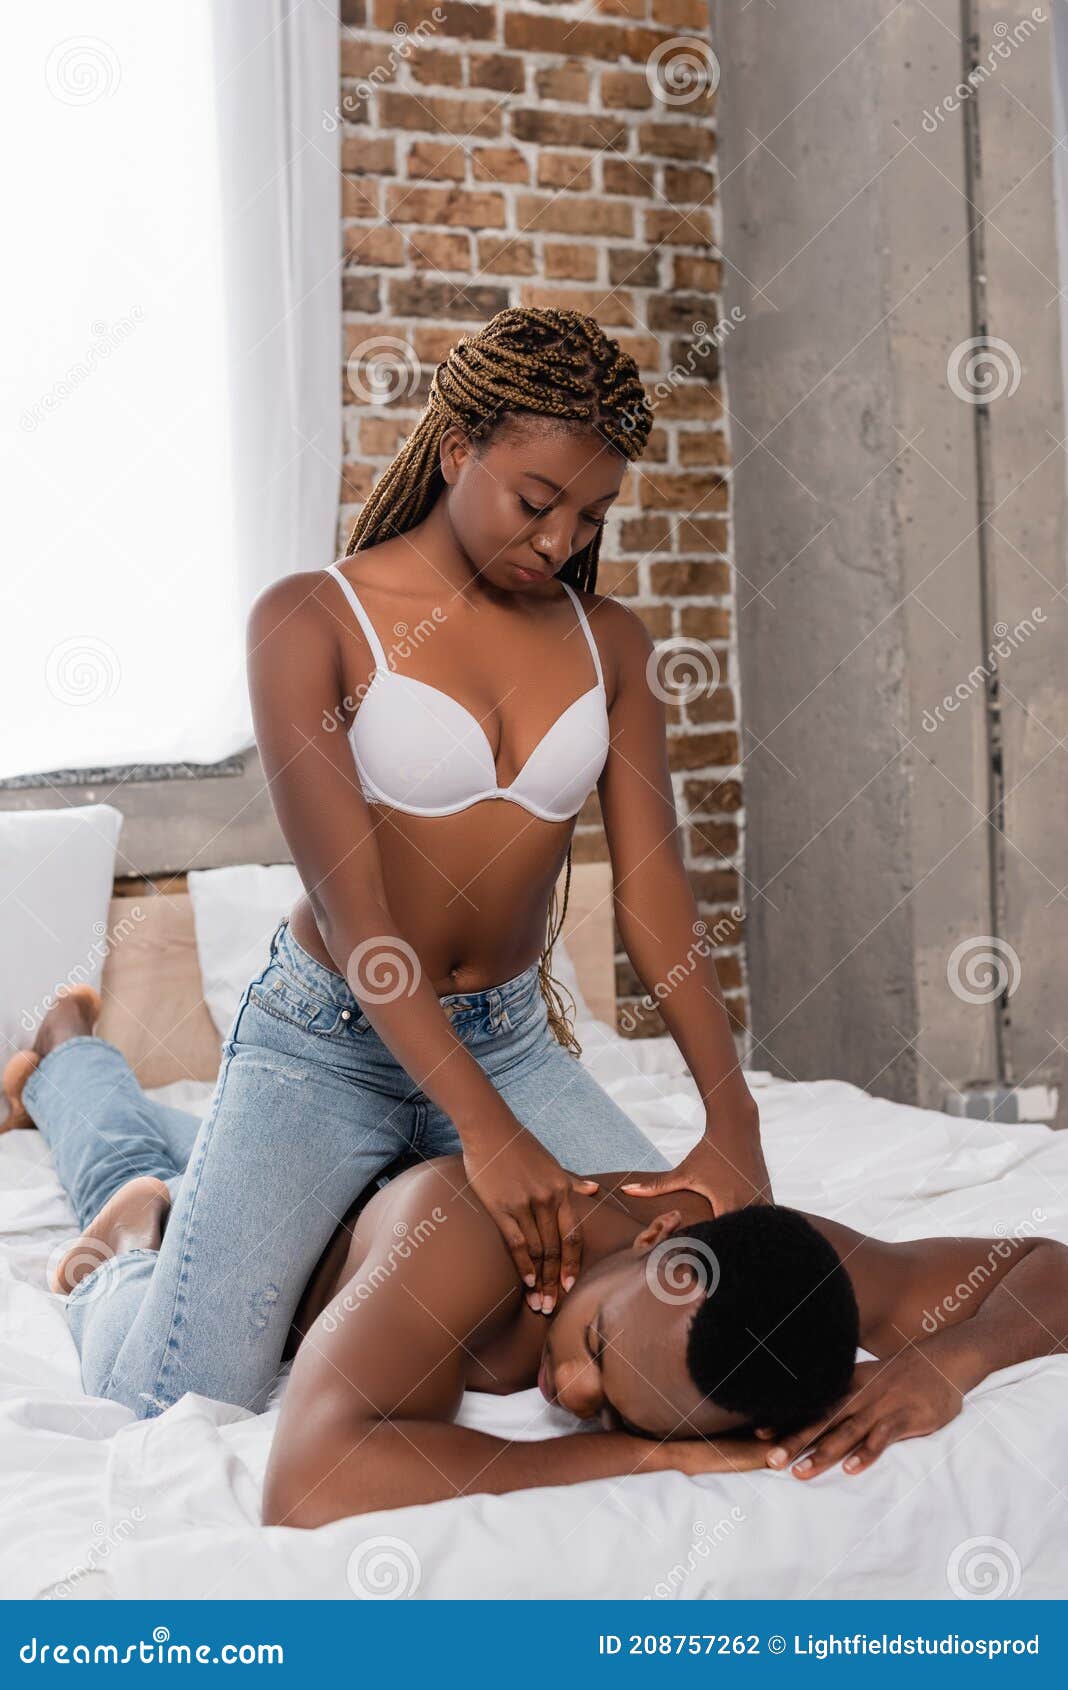 View of Romantic Shirtless African American Stock Photo - Image of  underwear, touch: 208757262